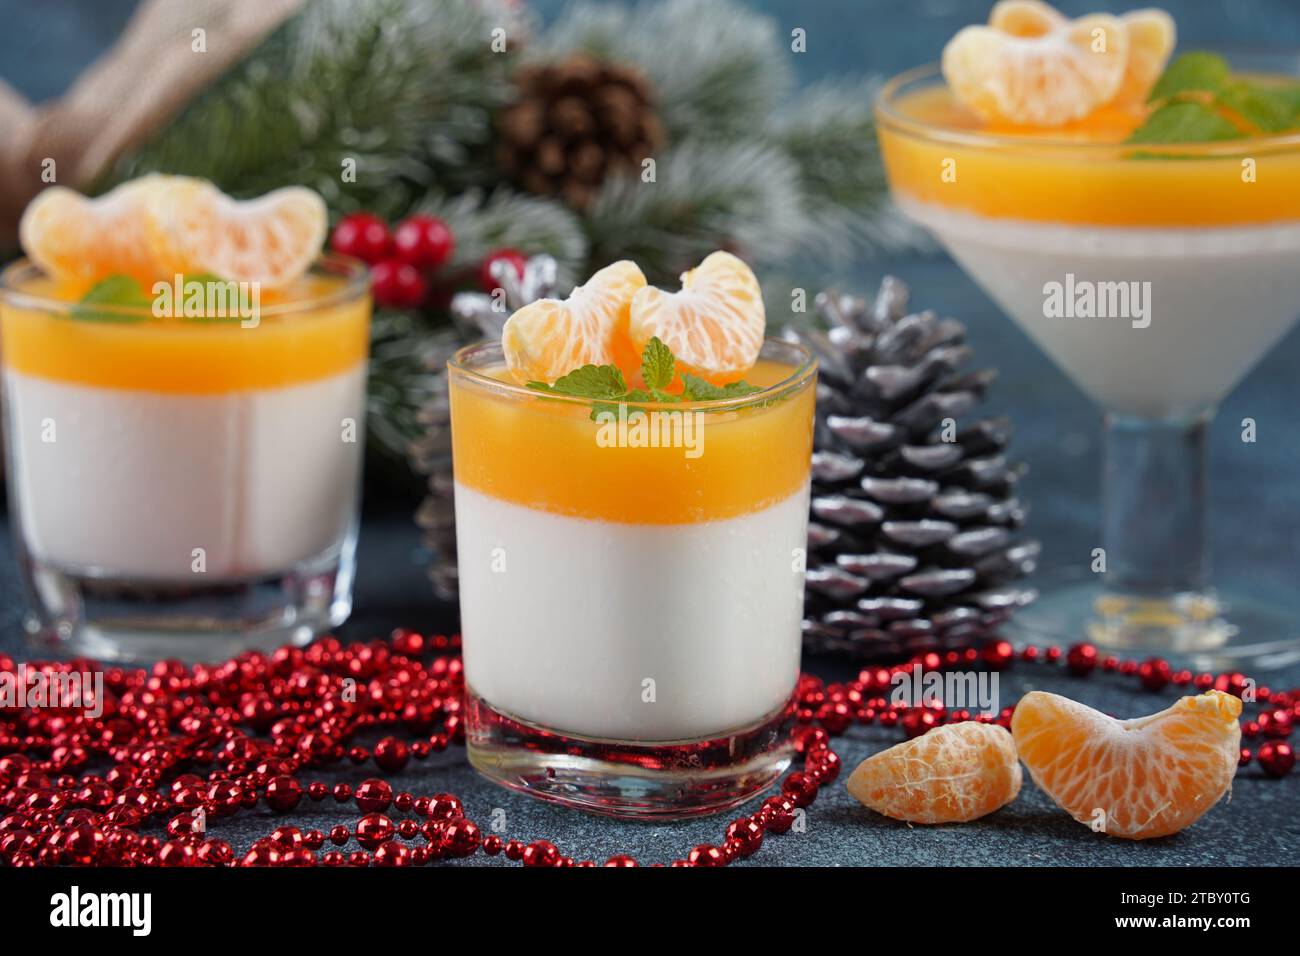 Panna cotta with tangerines jelly and mint, Italian dessert, homemade cuisine. On the background are branches of a green Christmas tree. Stock Photo